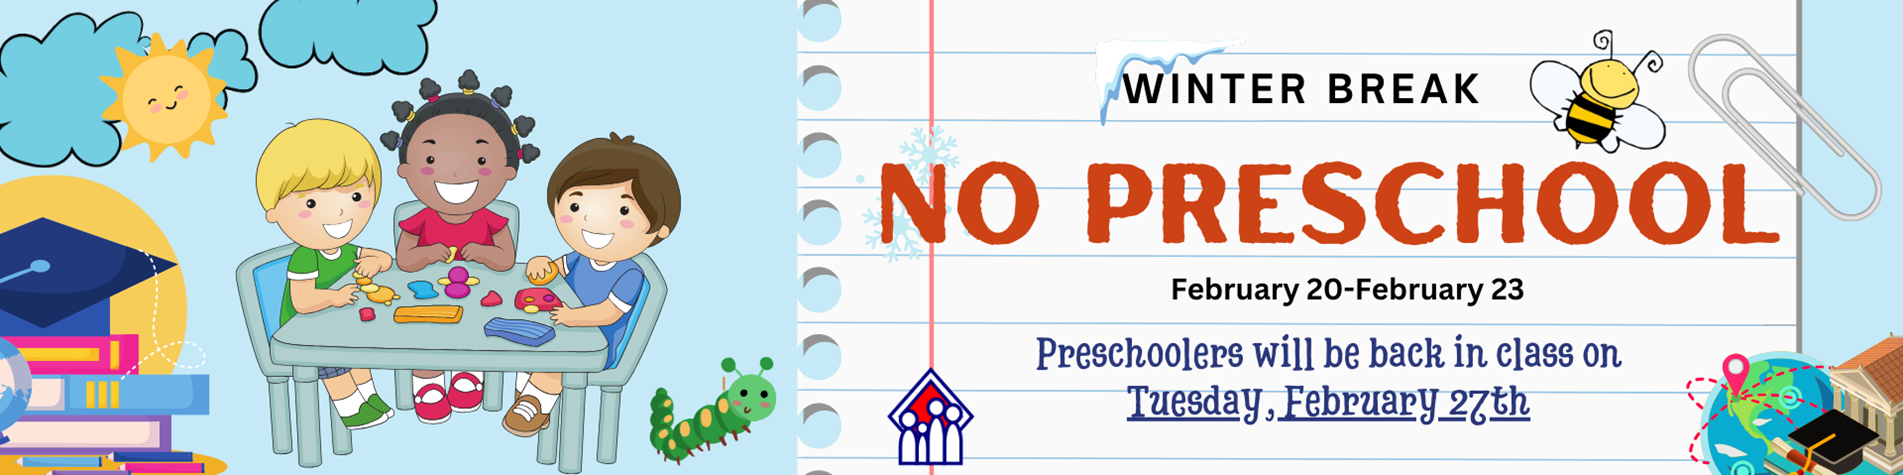 Winter Break; preschoolers come back to class on Tuesday, February 27th